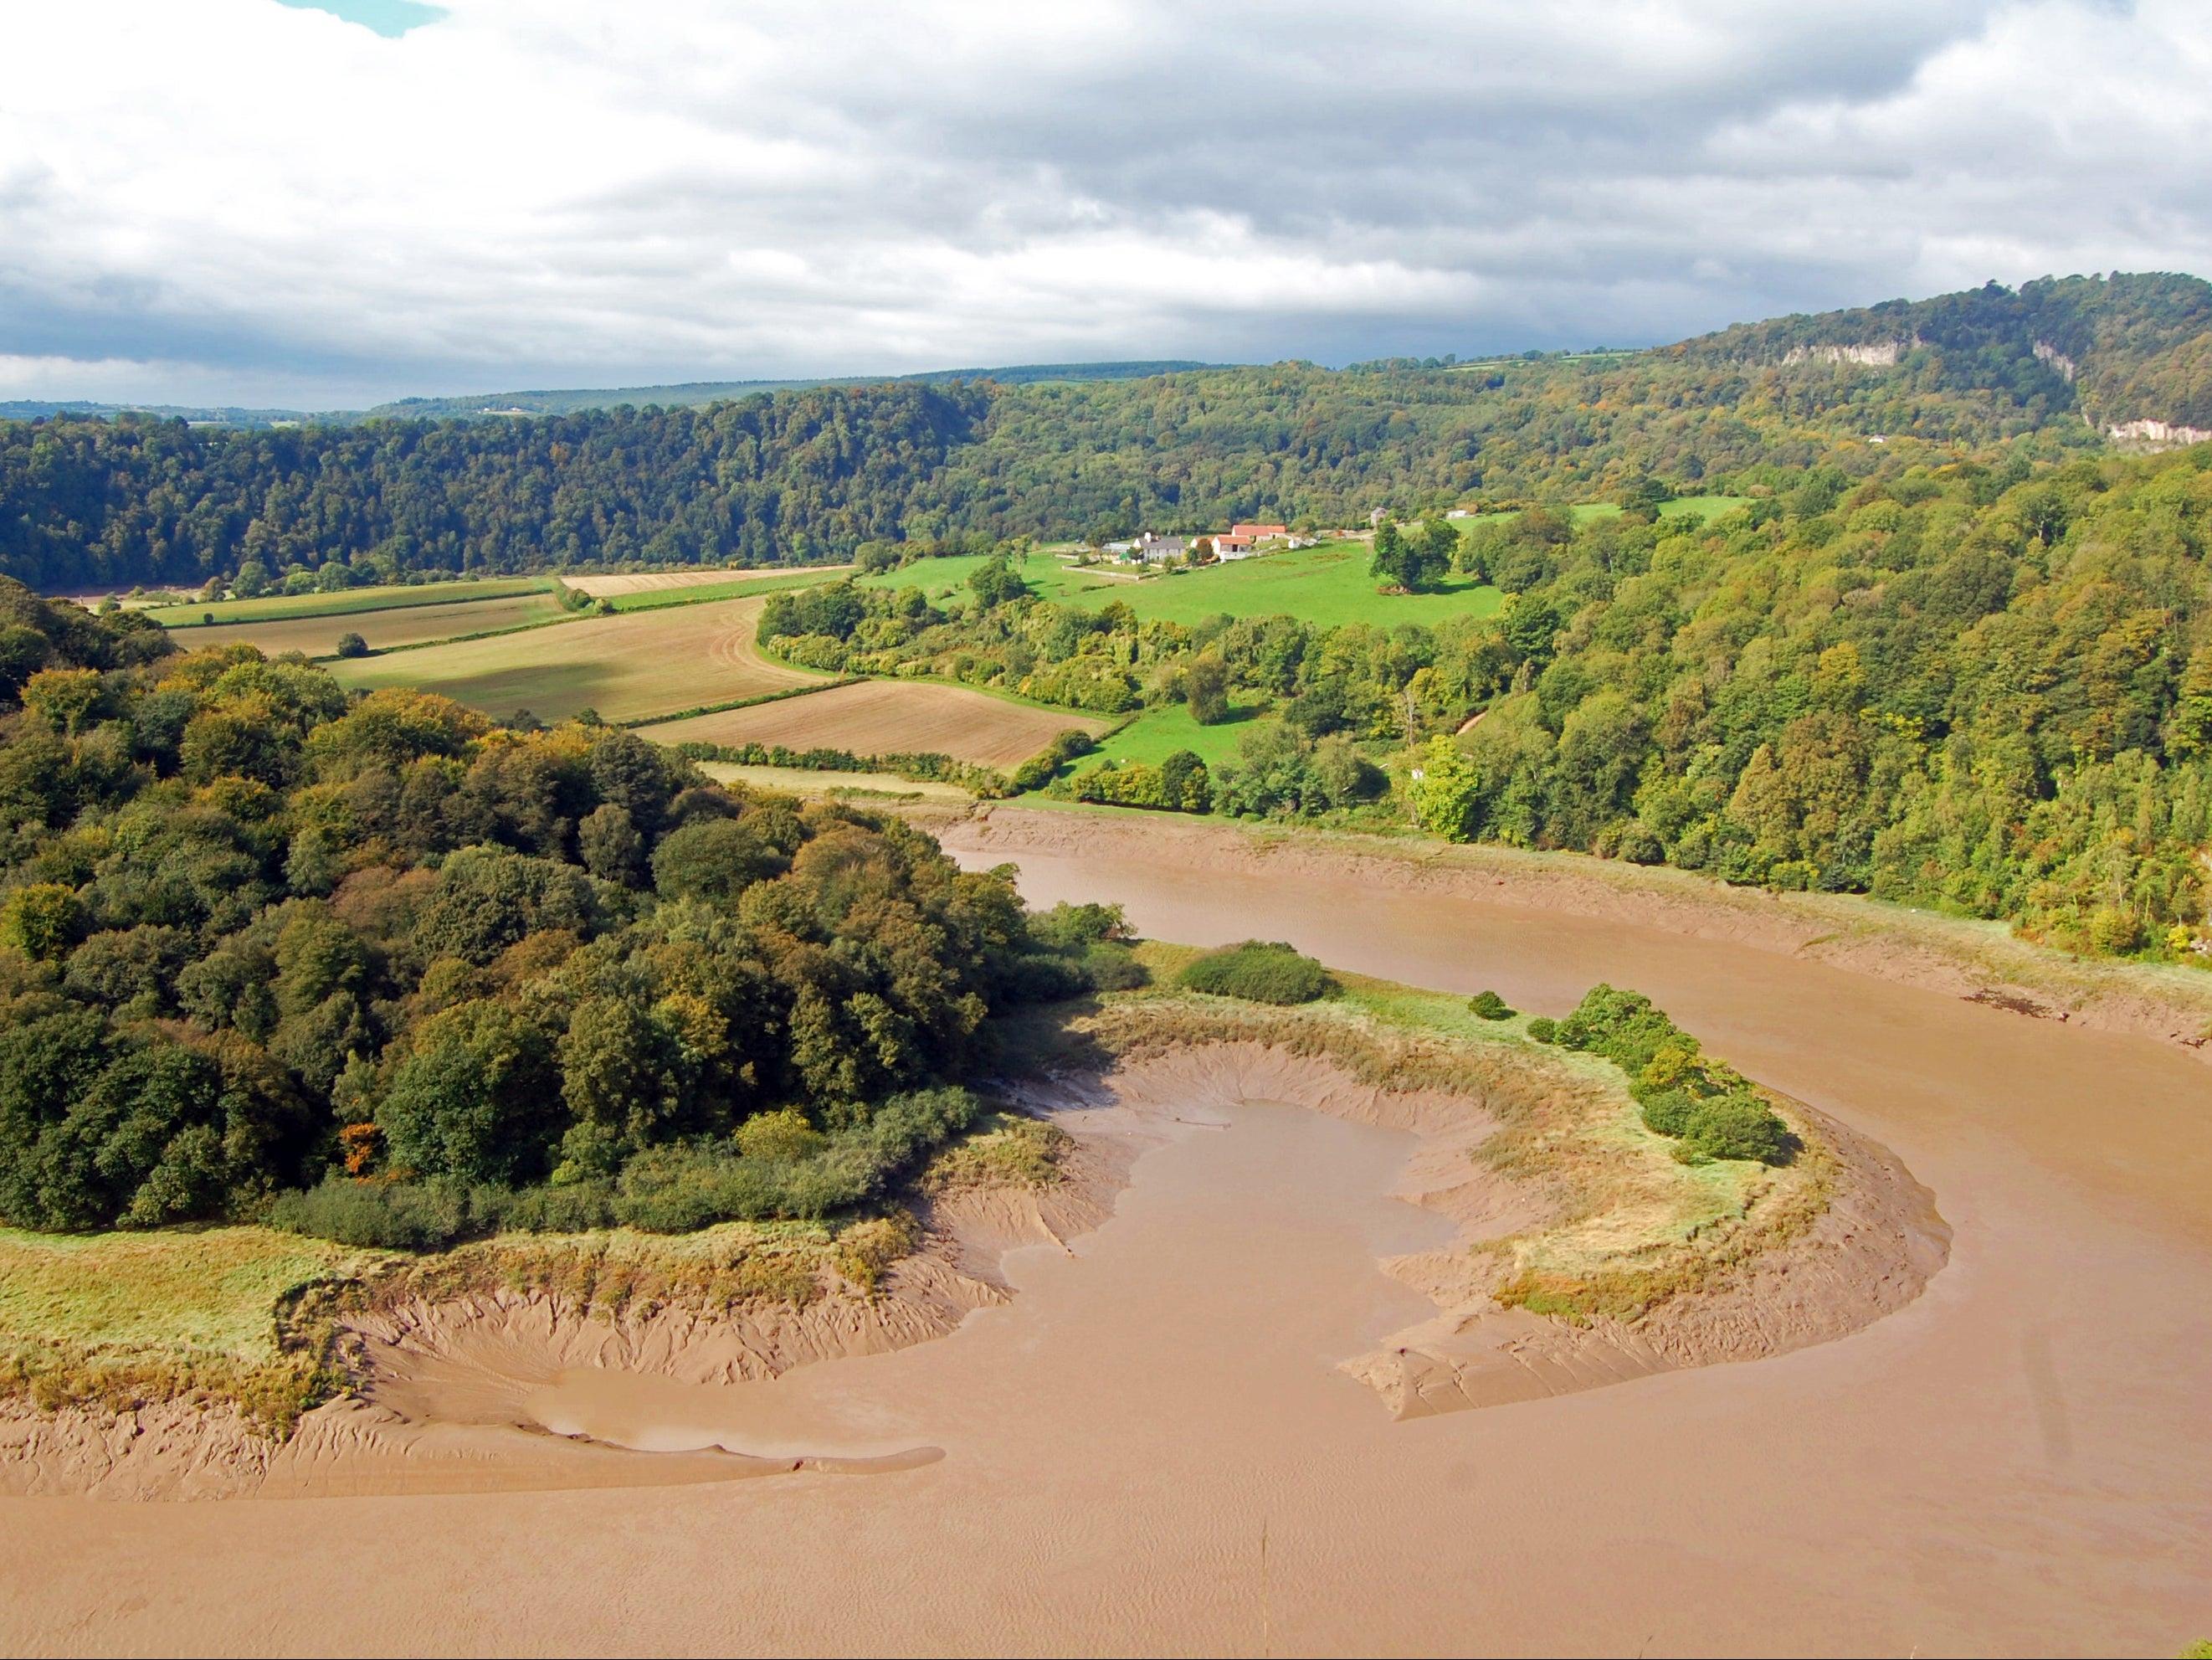 High levels of dangerous pollutants have been found at almost all stages of the River Wye which flows along the border between Wales and England